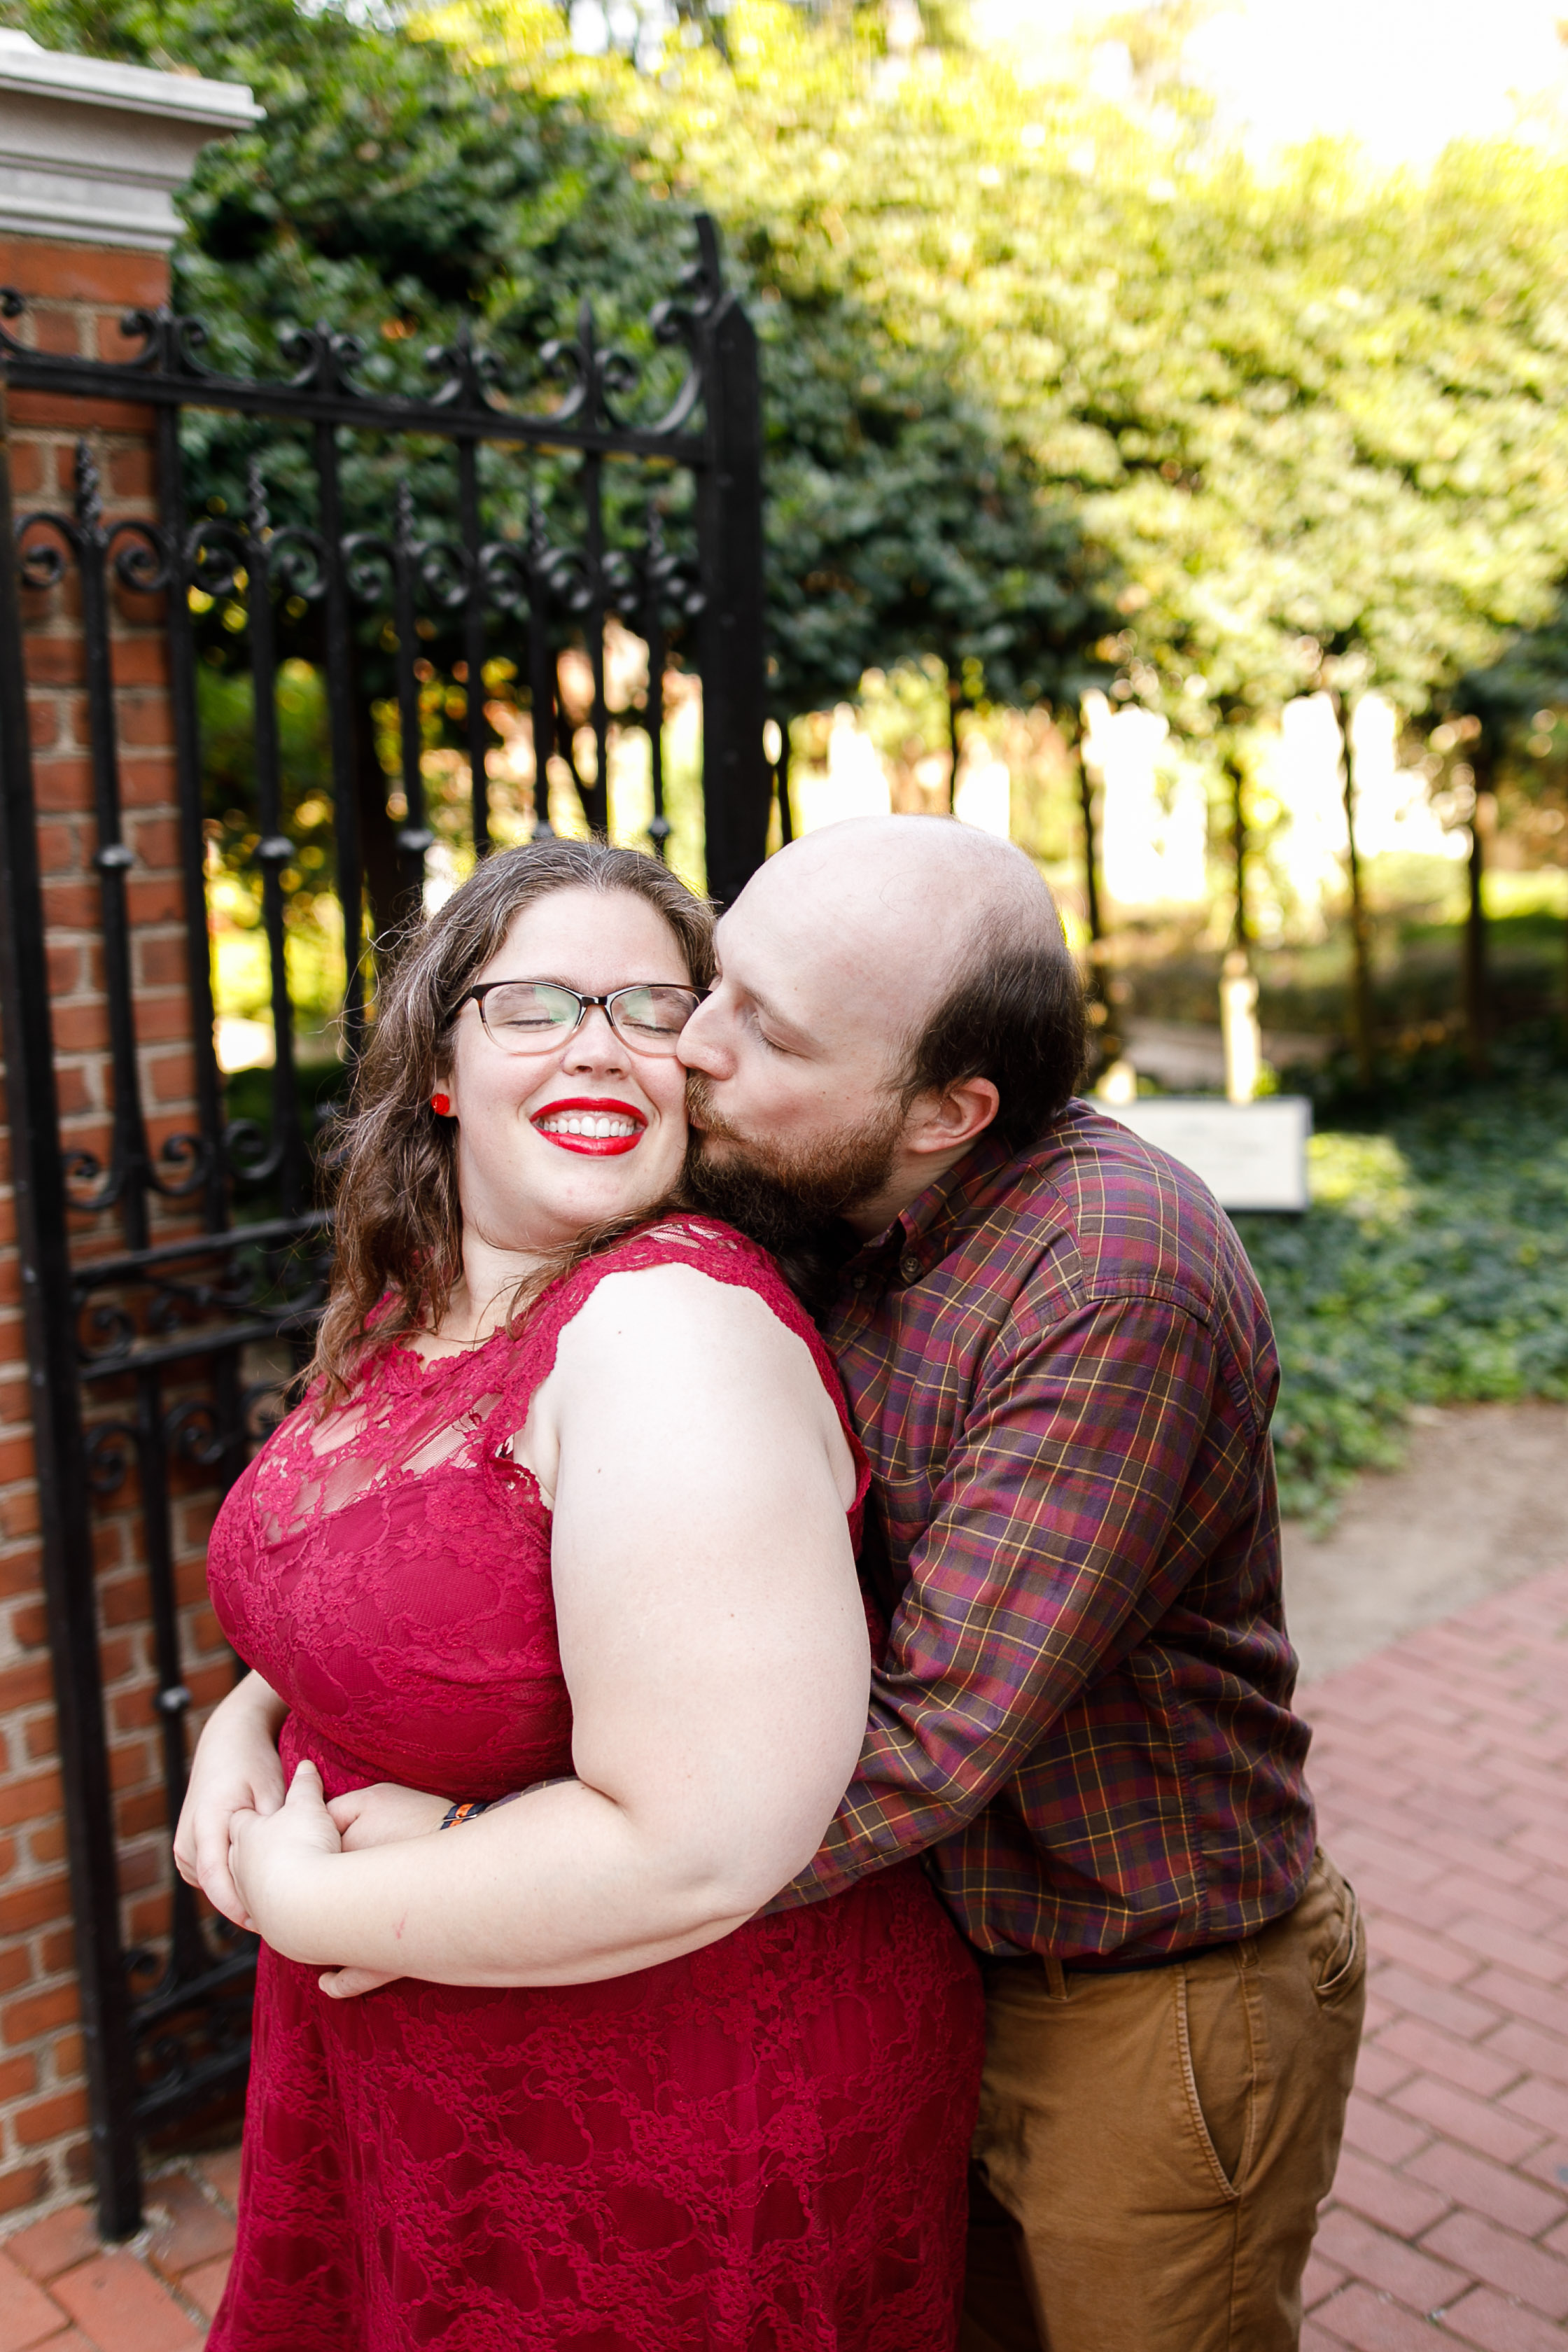 D&A Old City Philly Couples Session Photo Location Ideas 9.jpg